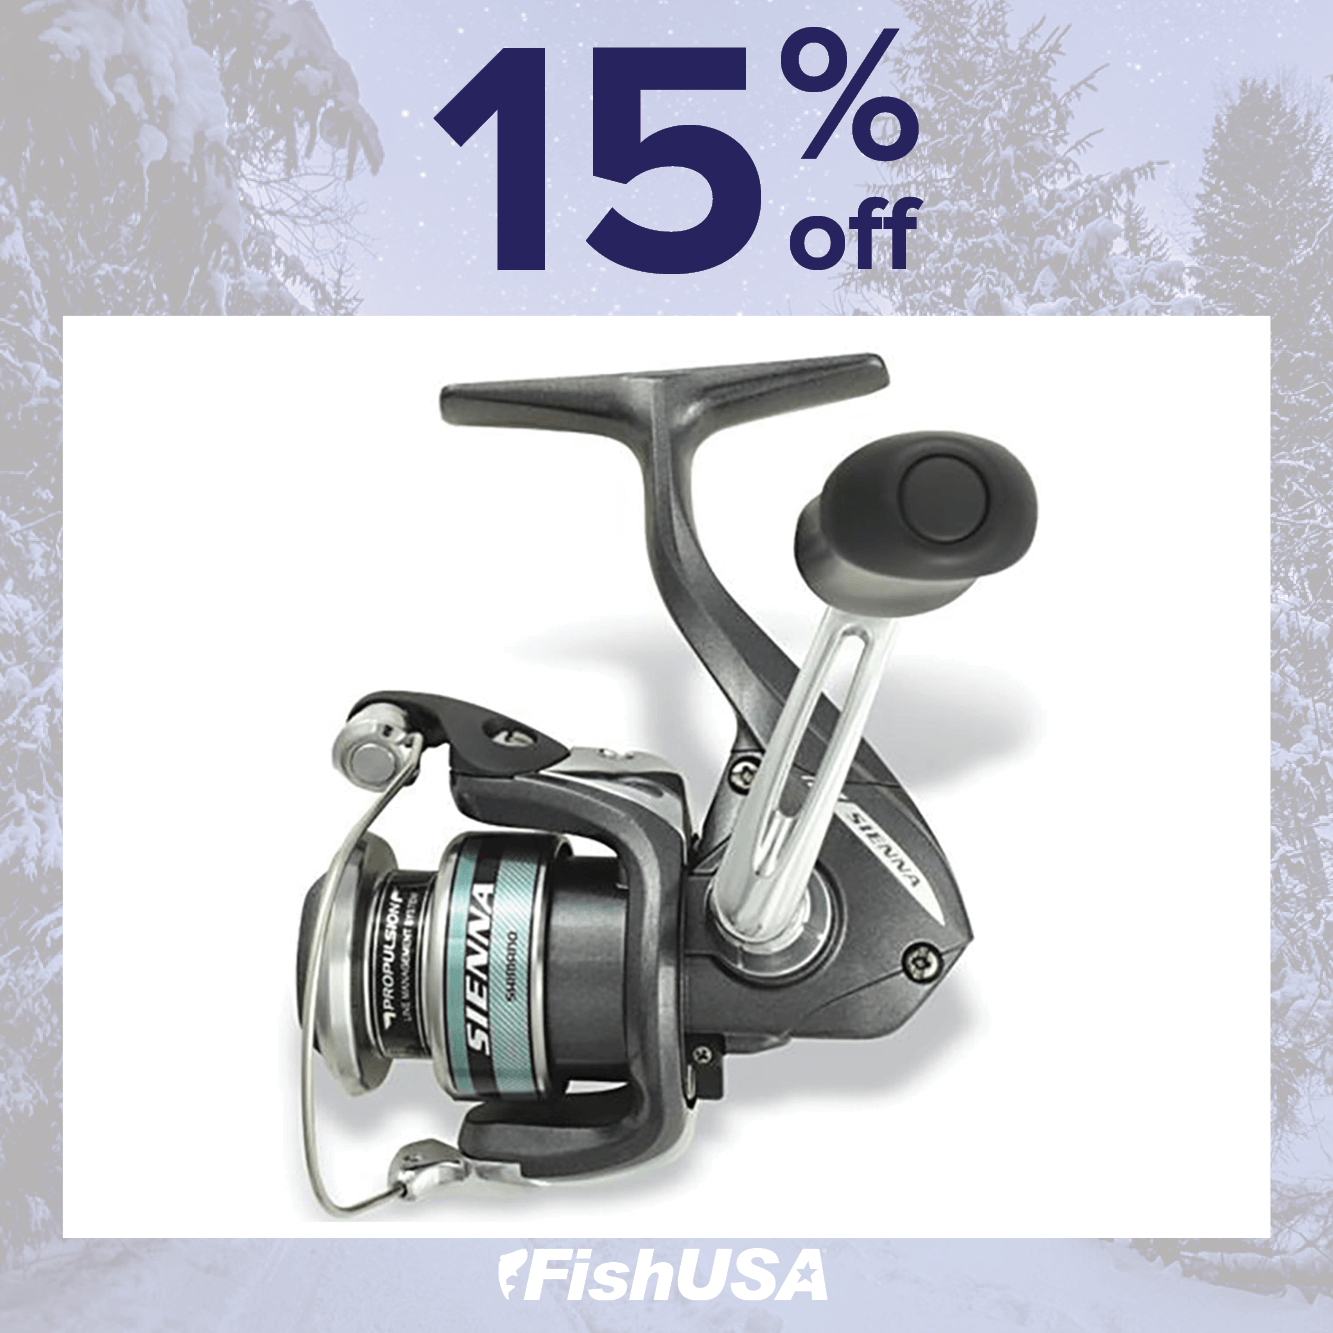 20% off the Shimano Sienna FD Spinning Reels